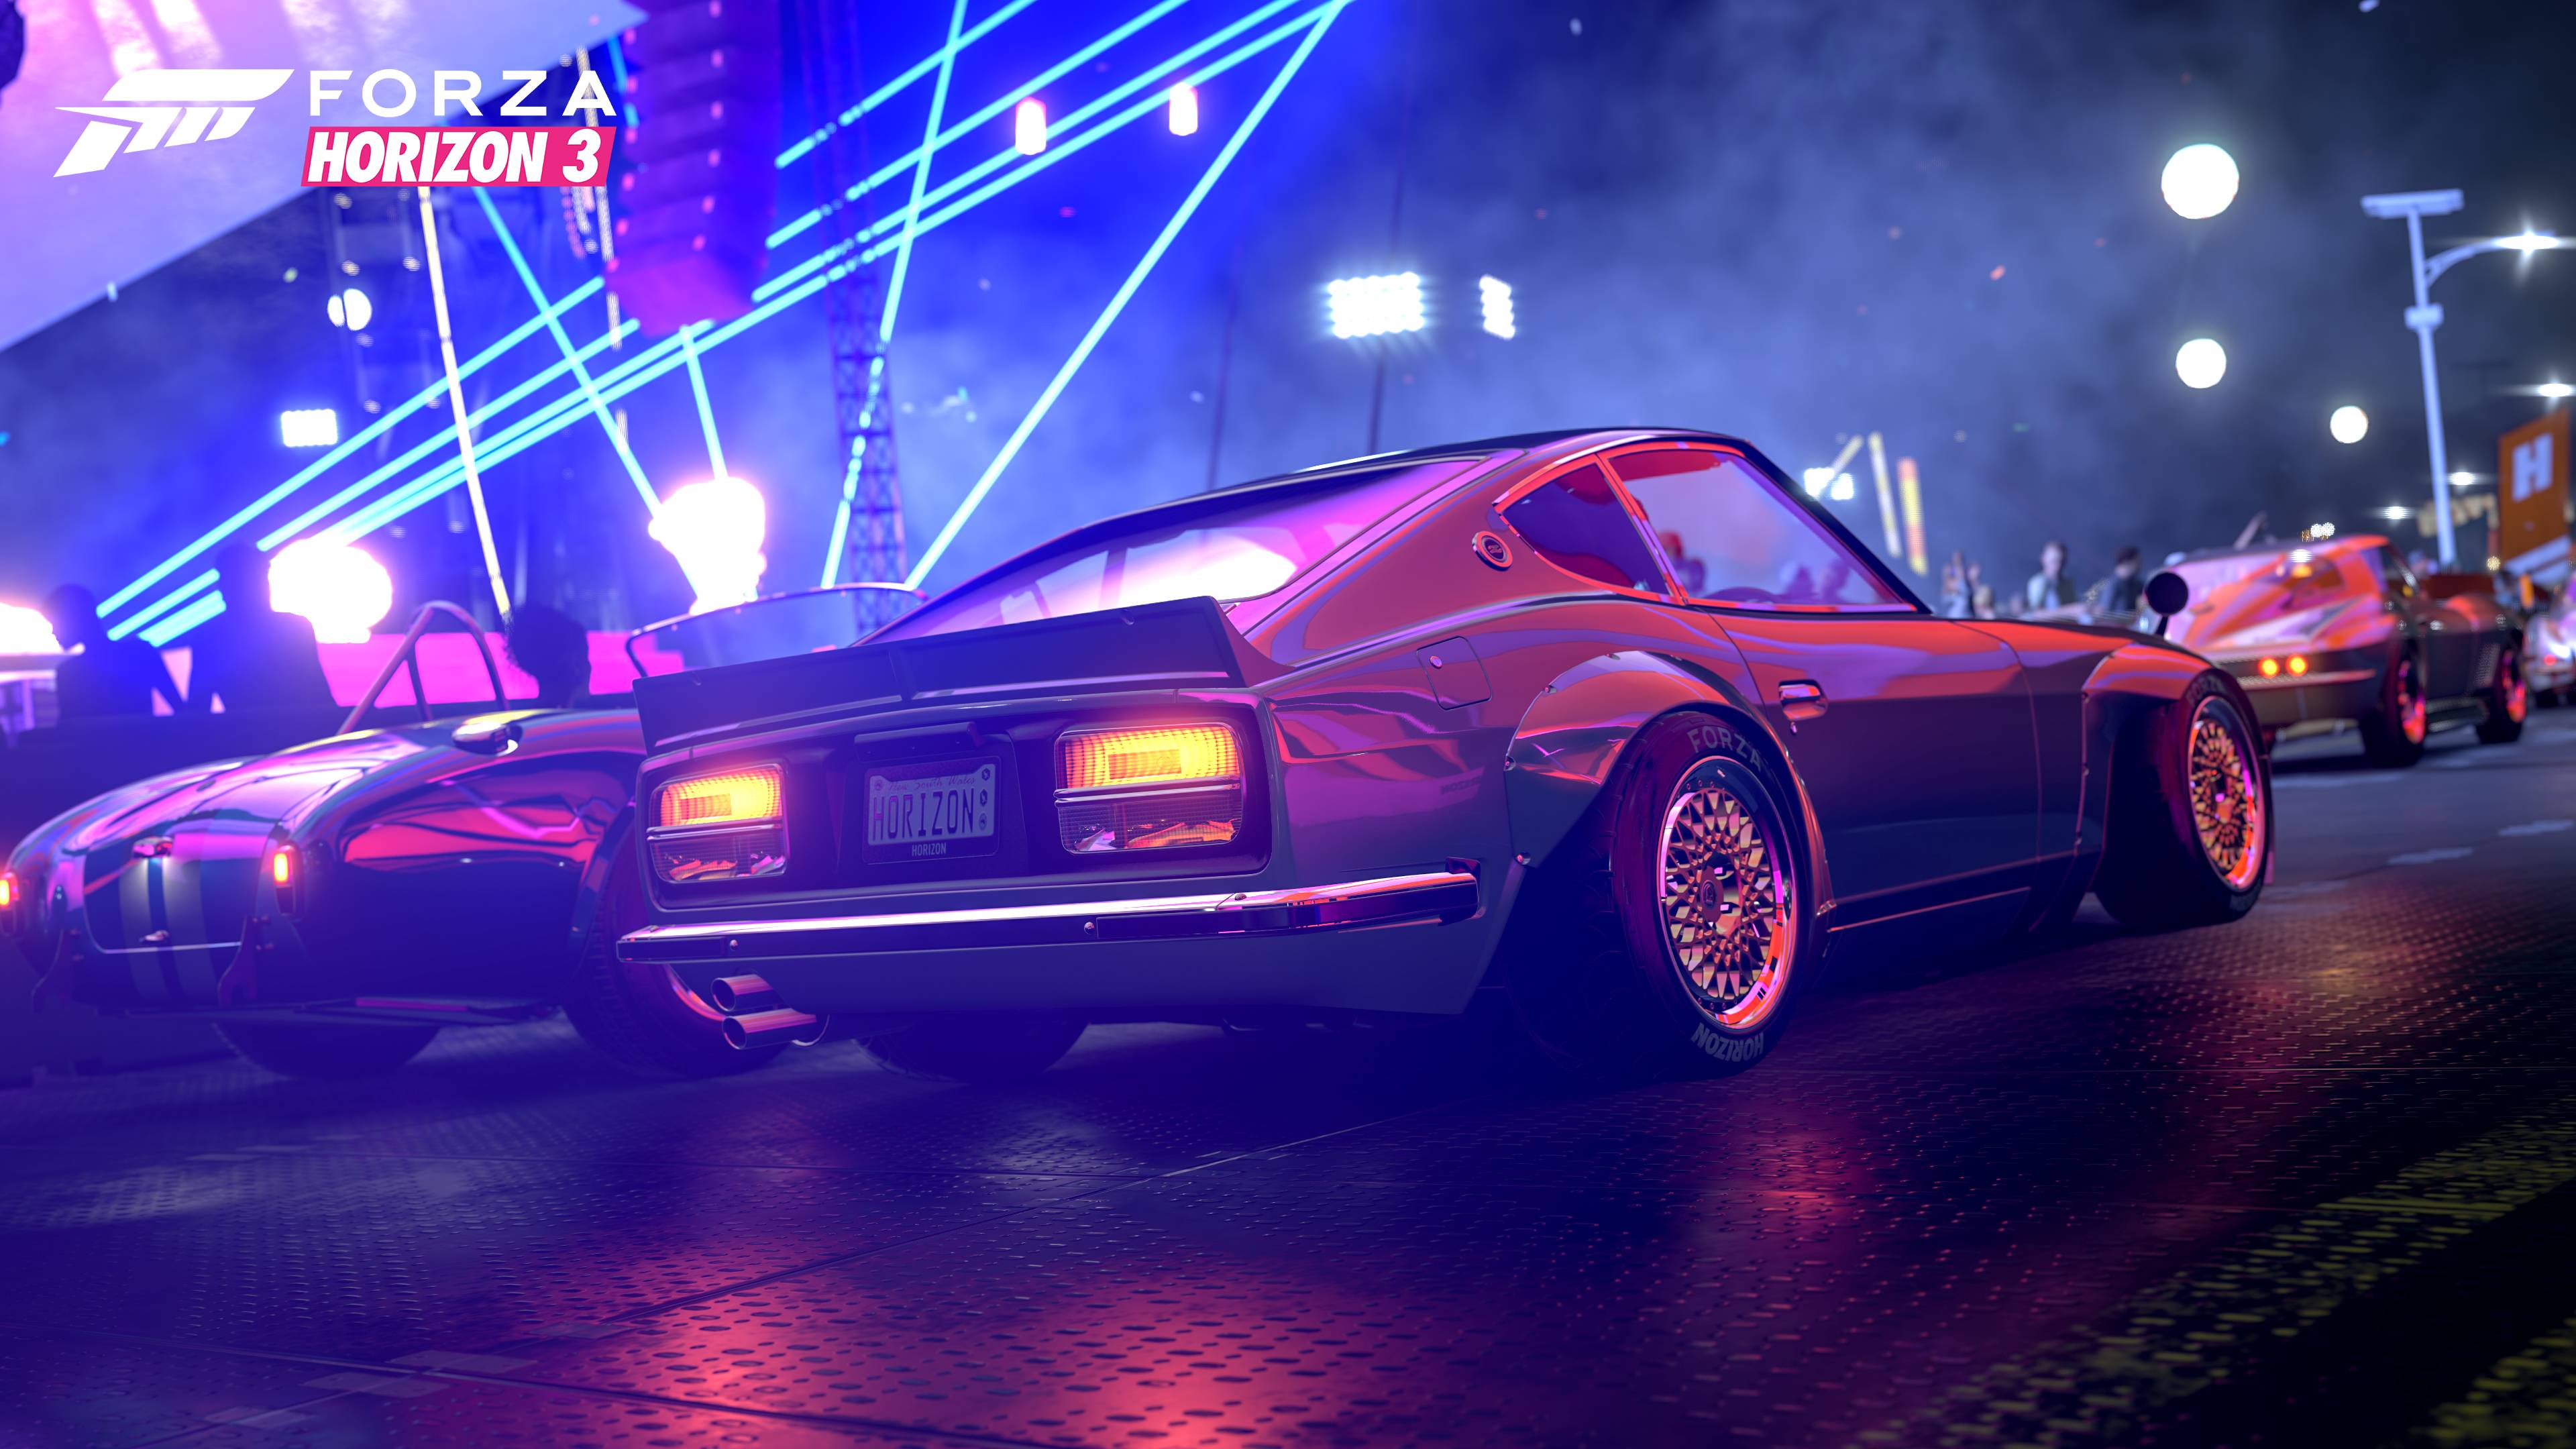 Wallpaper, Forza Games, forza horizon Ford Mustang, Ford Coupe Cobra, street light, racing, neon glow 3840x2160